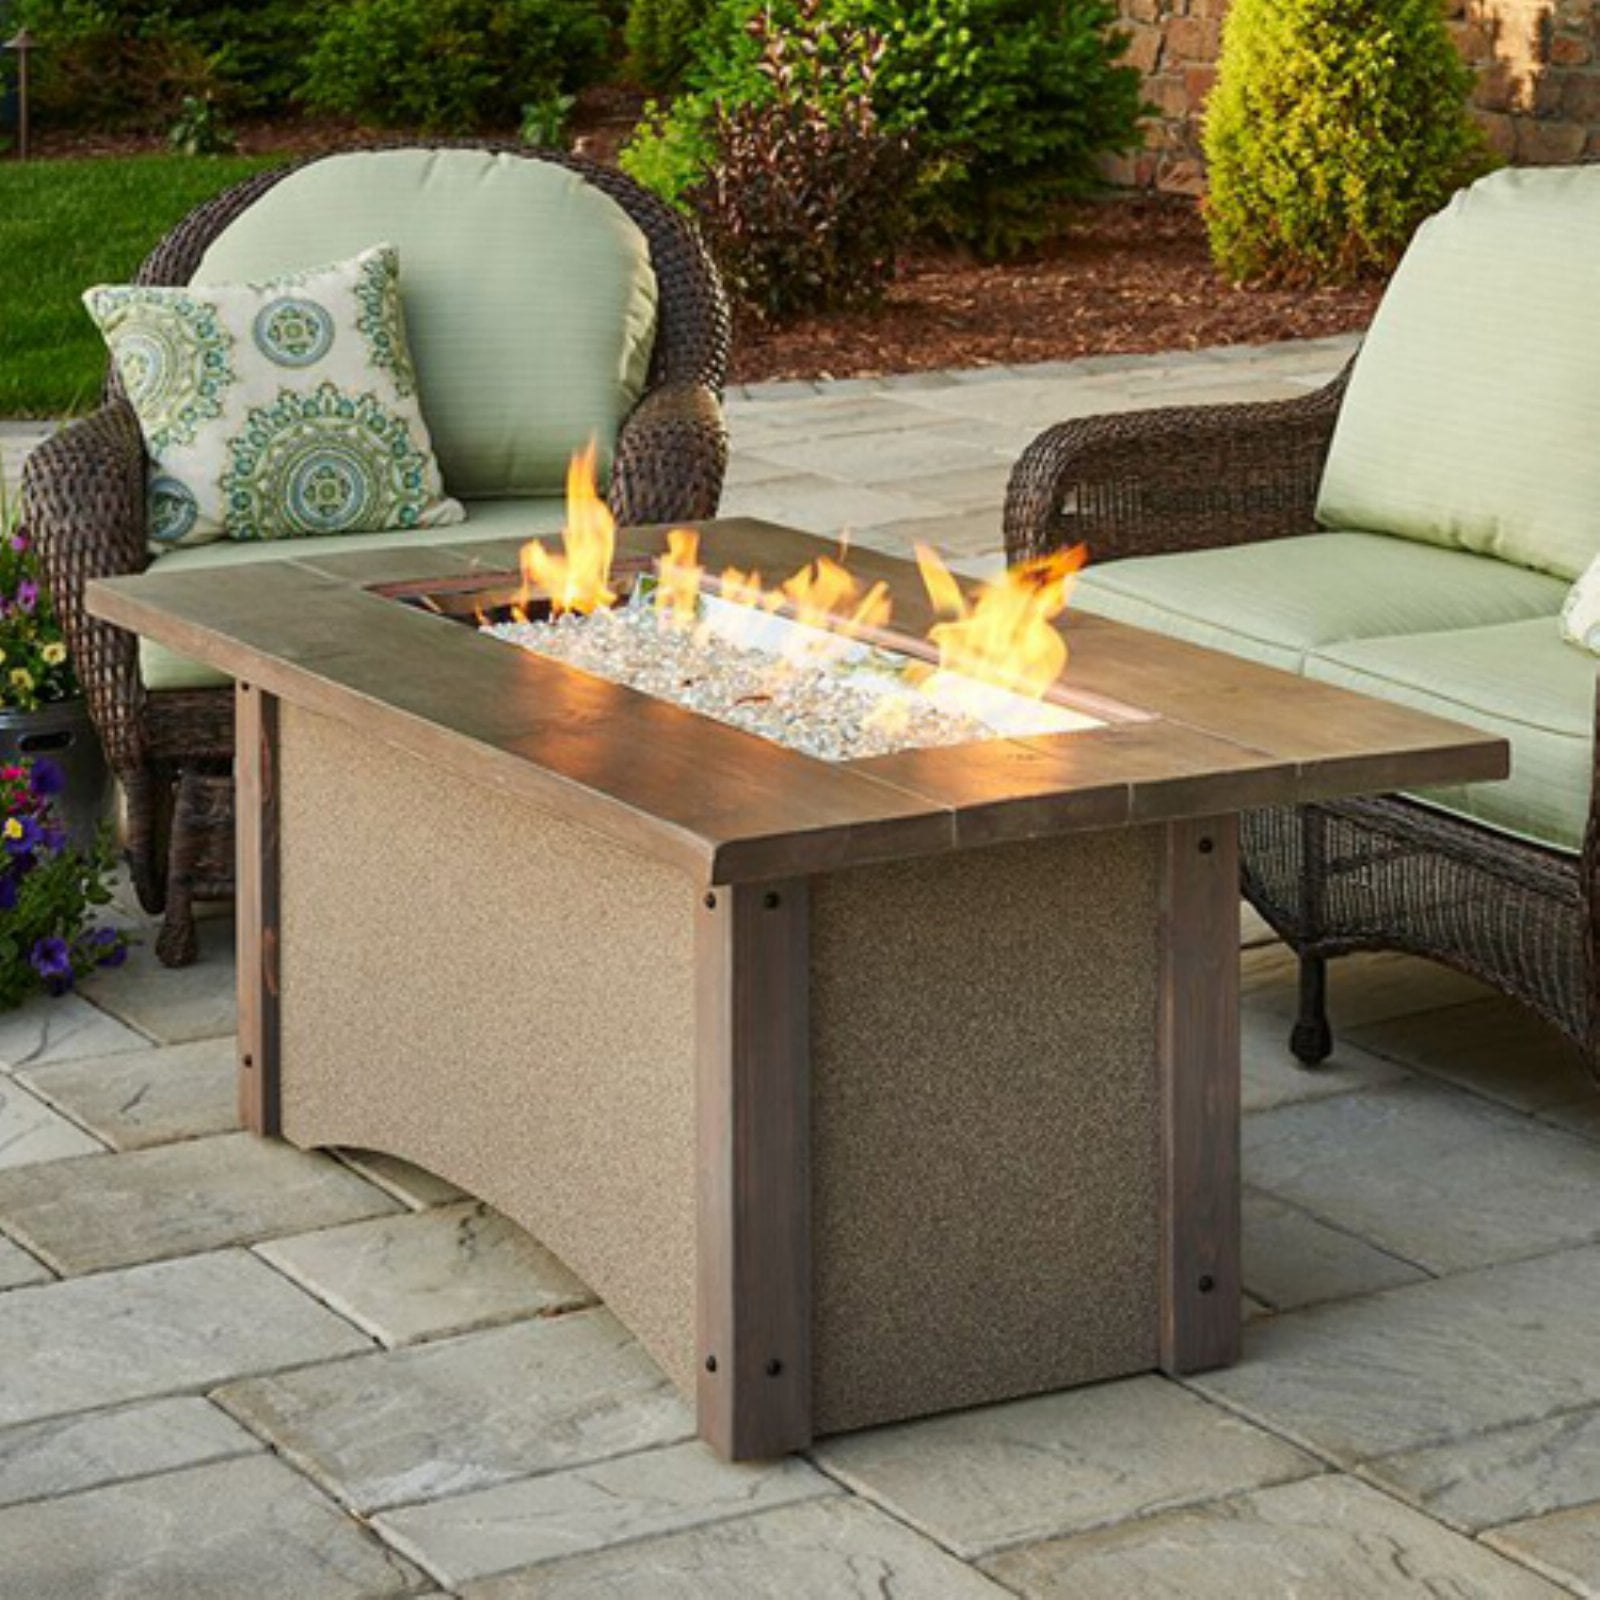 Outdoor GreatRoom Pine Ridge Rectangular Fire Pit Table with Free